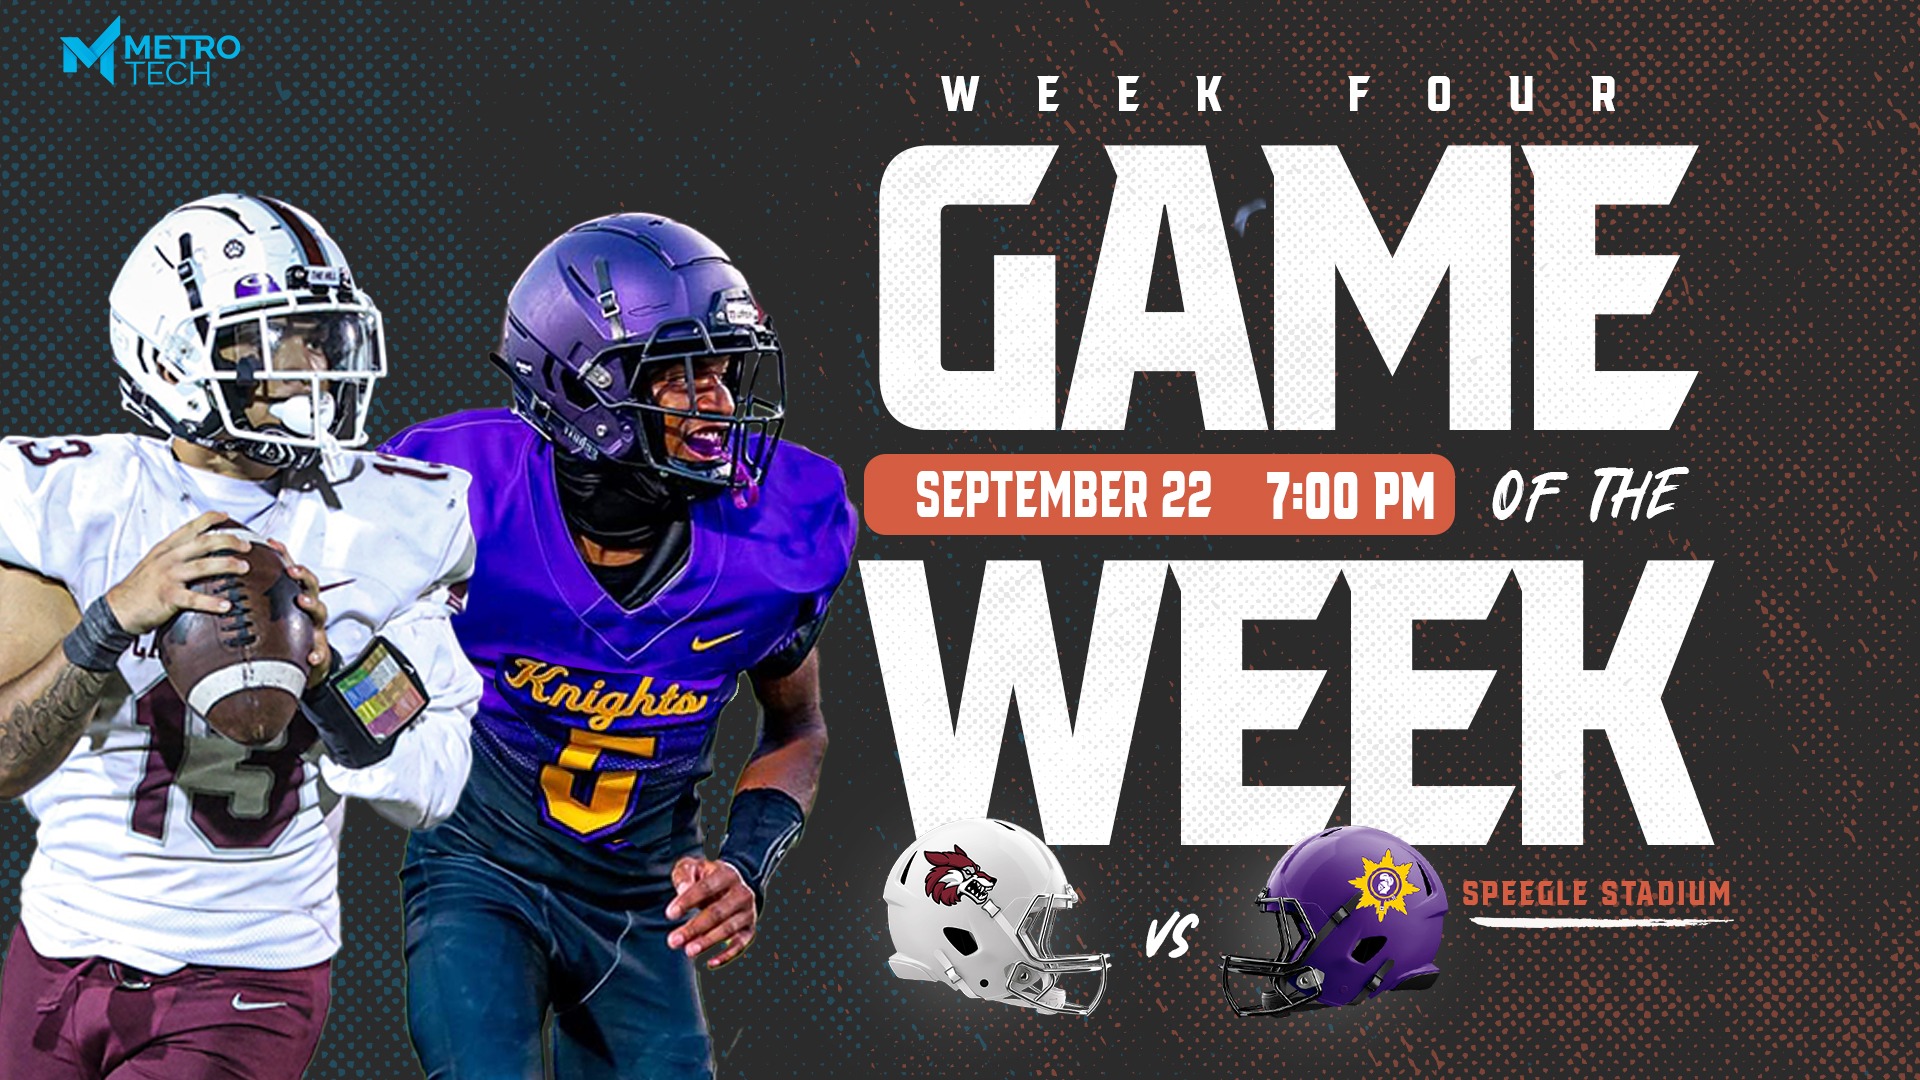 Slide 0 - Red Wolves Host Knights in OKCPS Game of the Week - September 22